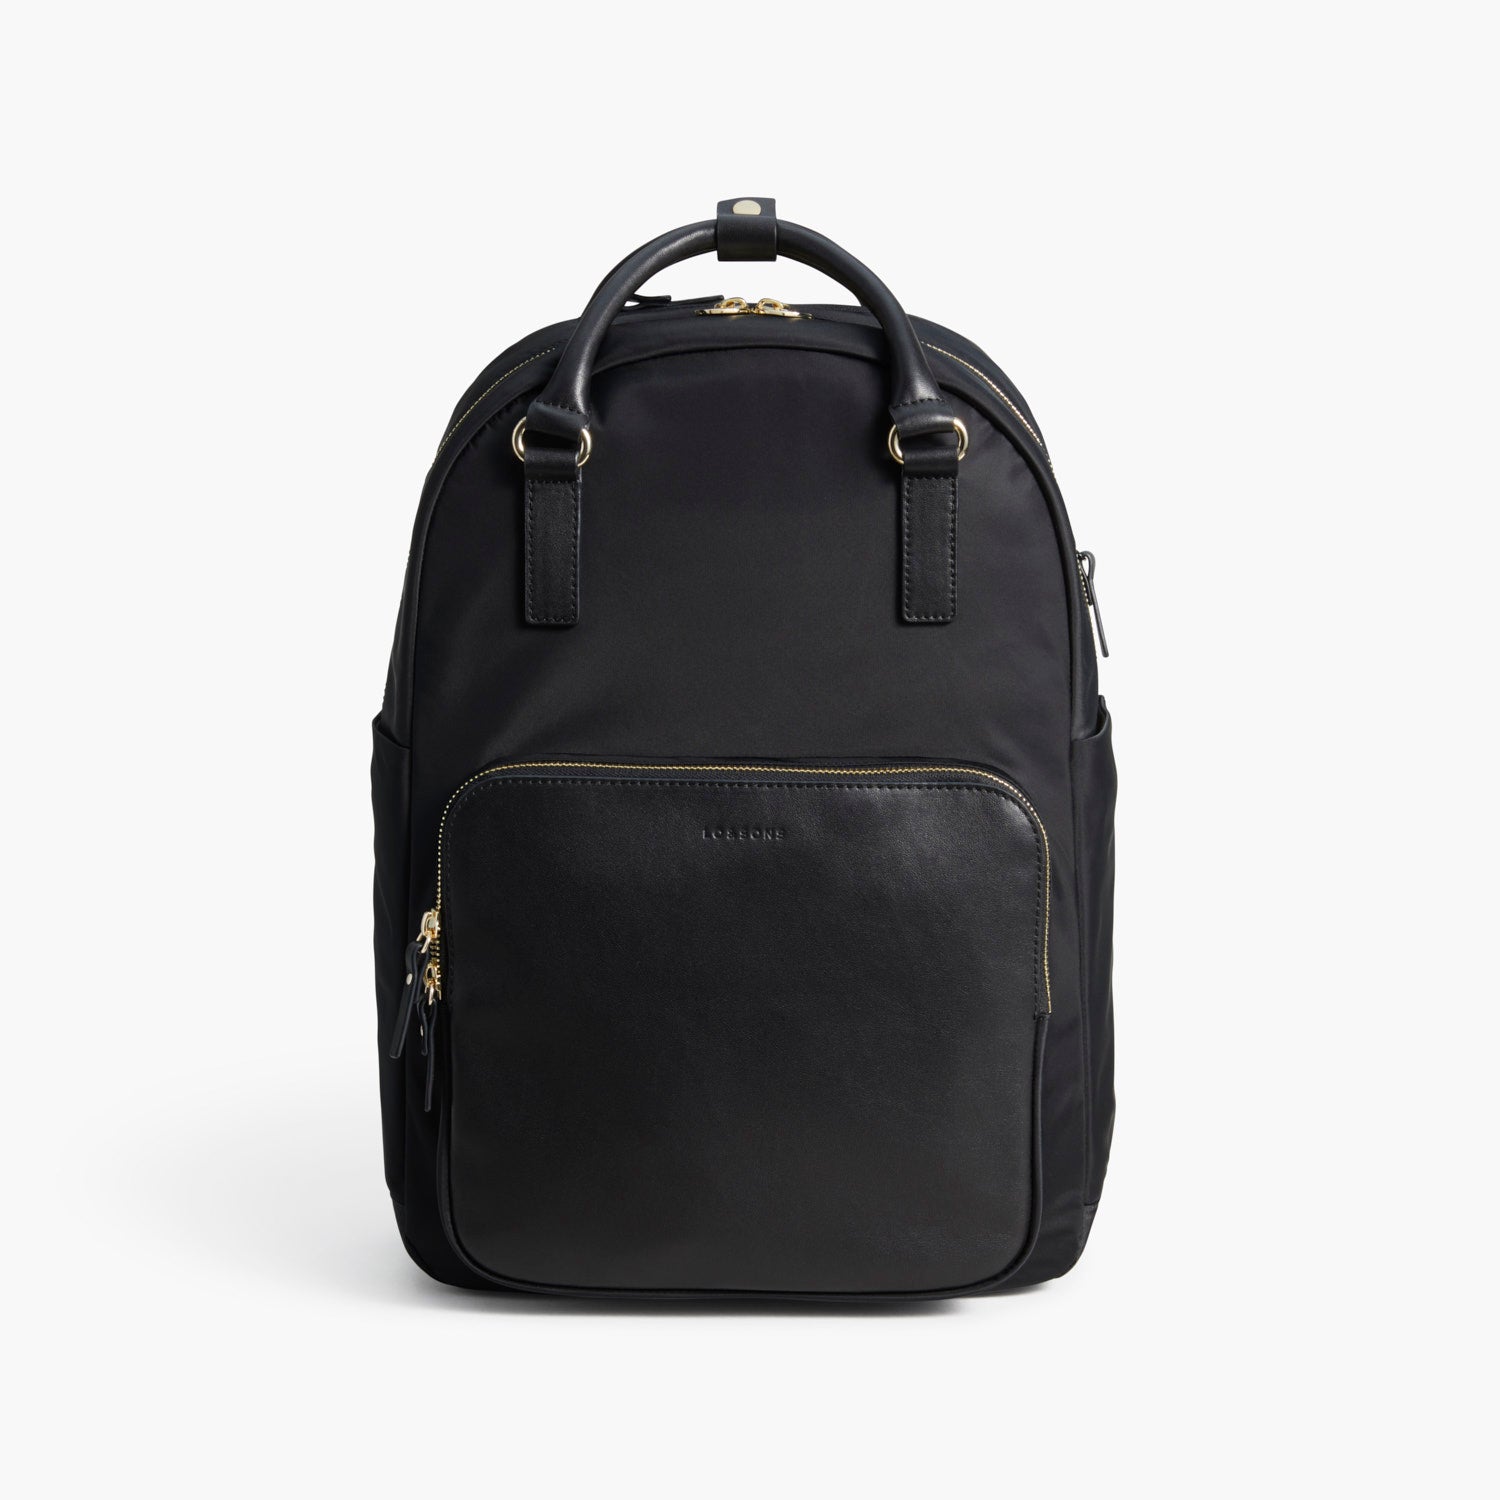 The Rowledge   Womens Laptop Backpack   Black/Gold/Lavender in